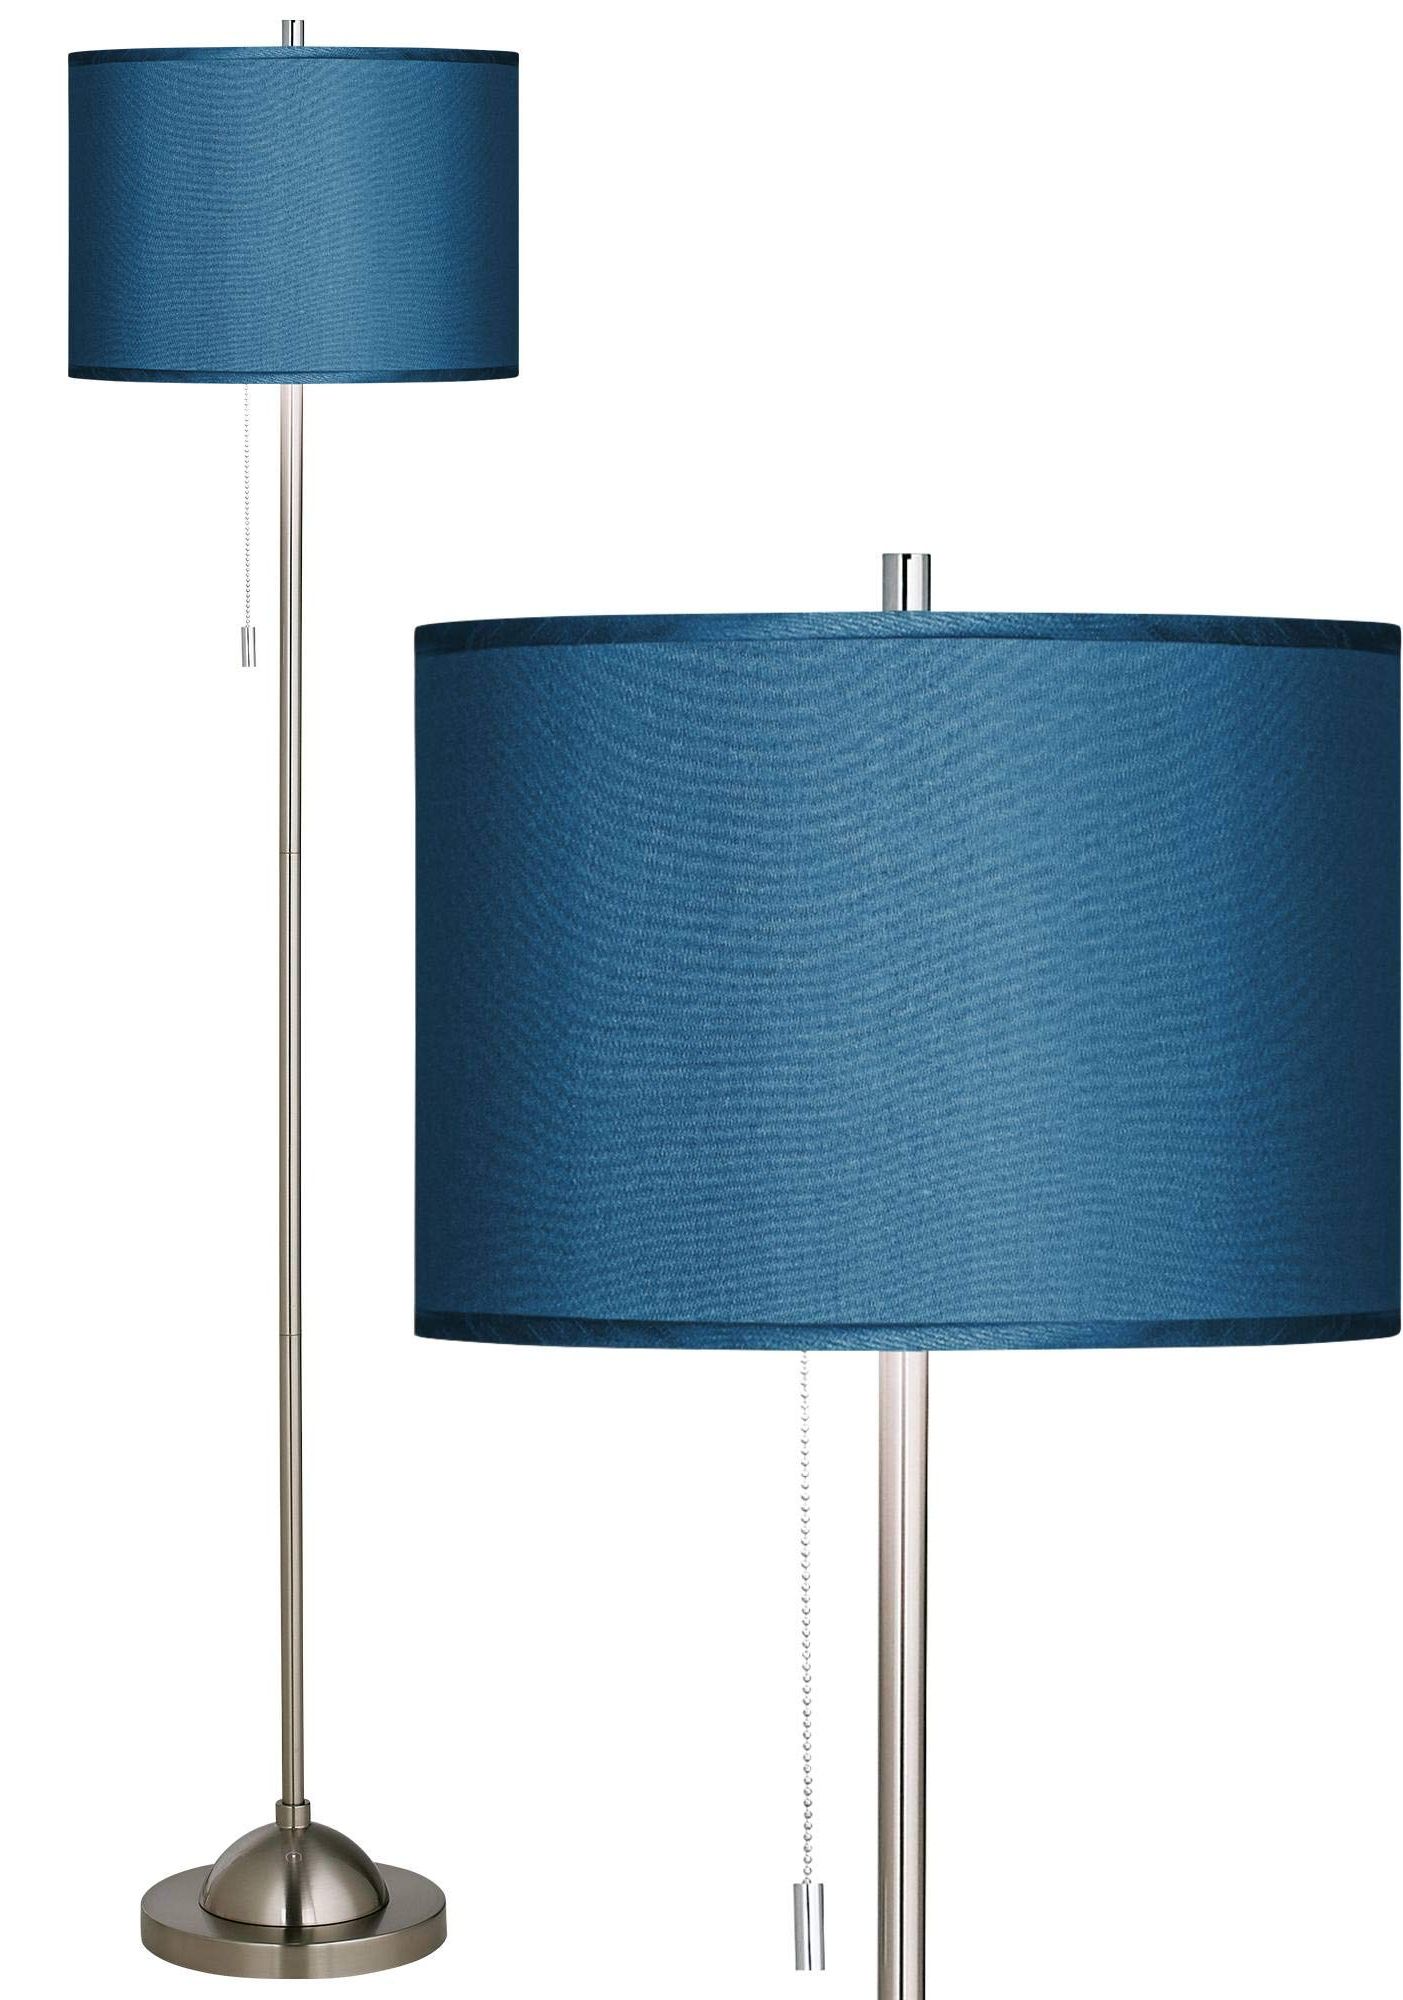 Textured Fabric Standing Lamps Throughout Most Recently Released Possini Euro Design Modern Minimalist Pole Lamp Floor Standing Thin 62"  Tall Brushed Nickel Silver Blue Textured Fabric Drum Shade Decor For Living  Room Reading House Bedroom Home – – Amazon (View 2 of 10)